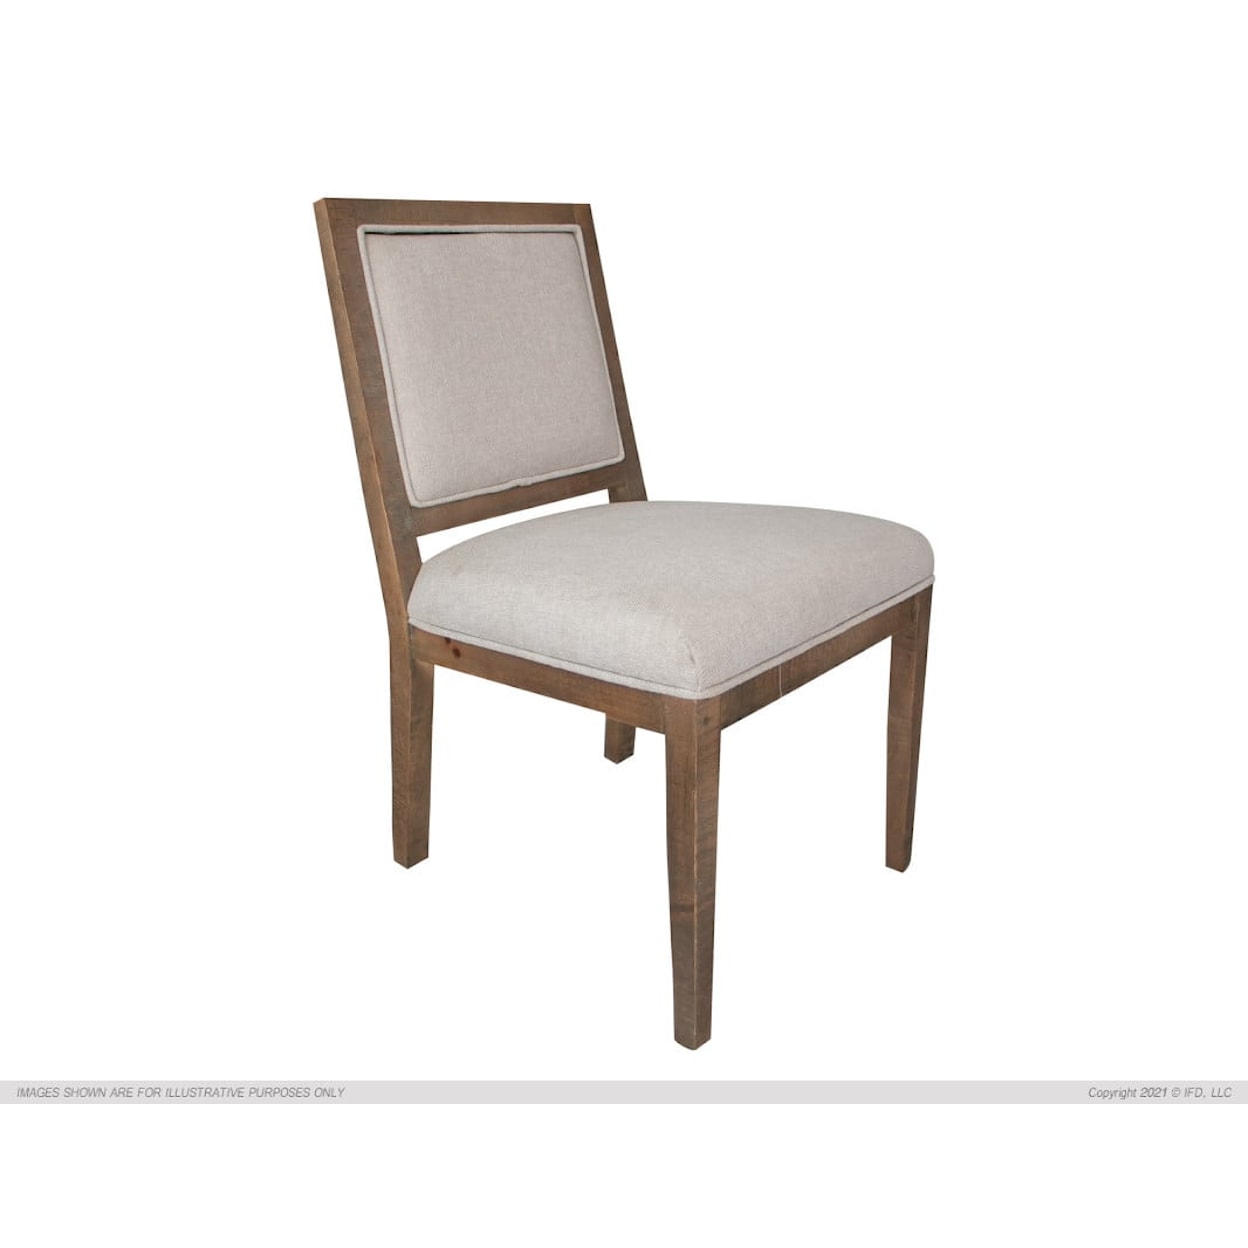 VFM Signature SEATING COLLECTION Upholstered Dining Chair